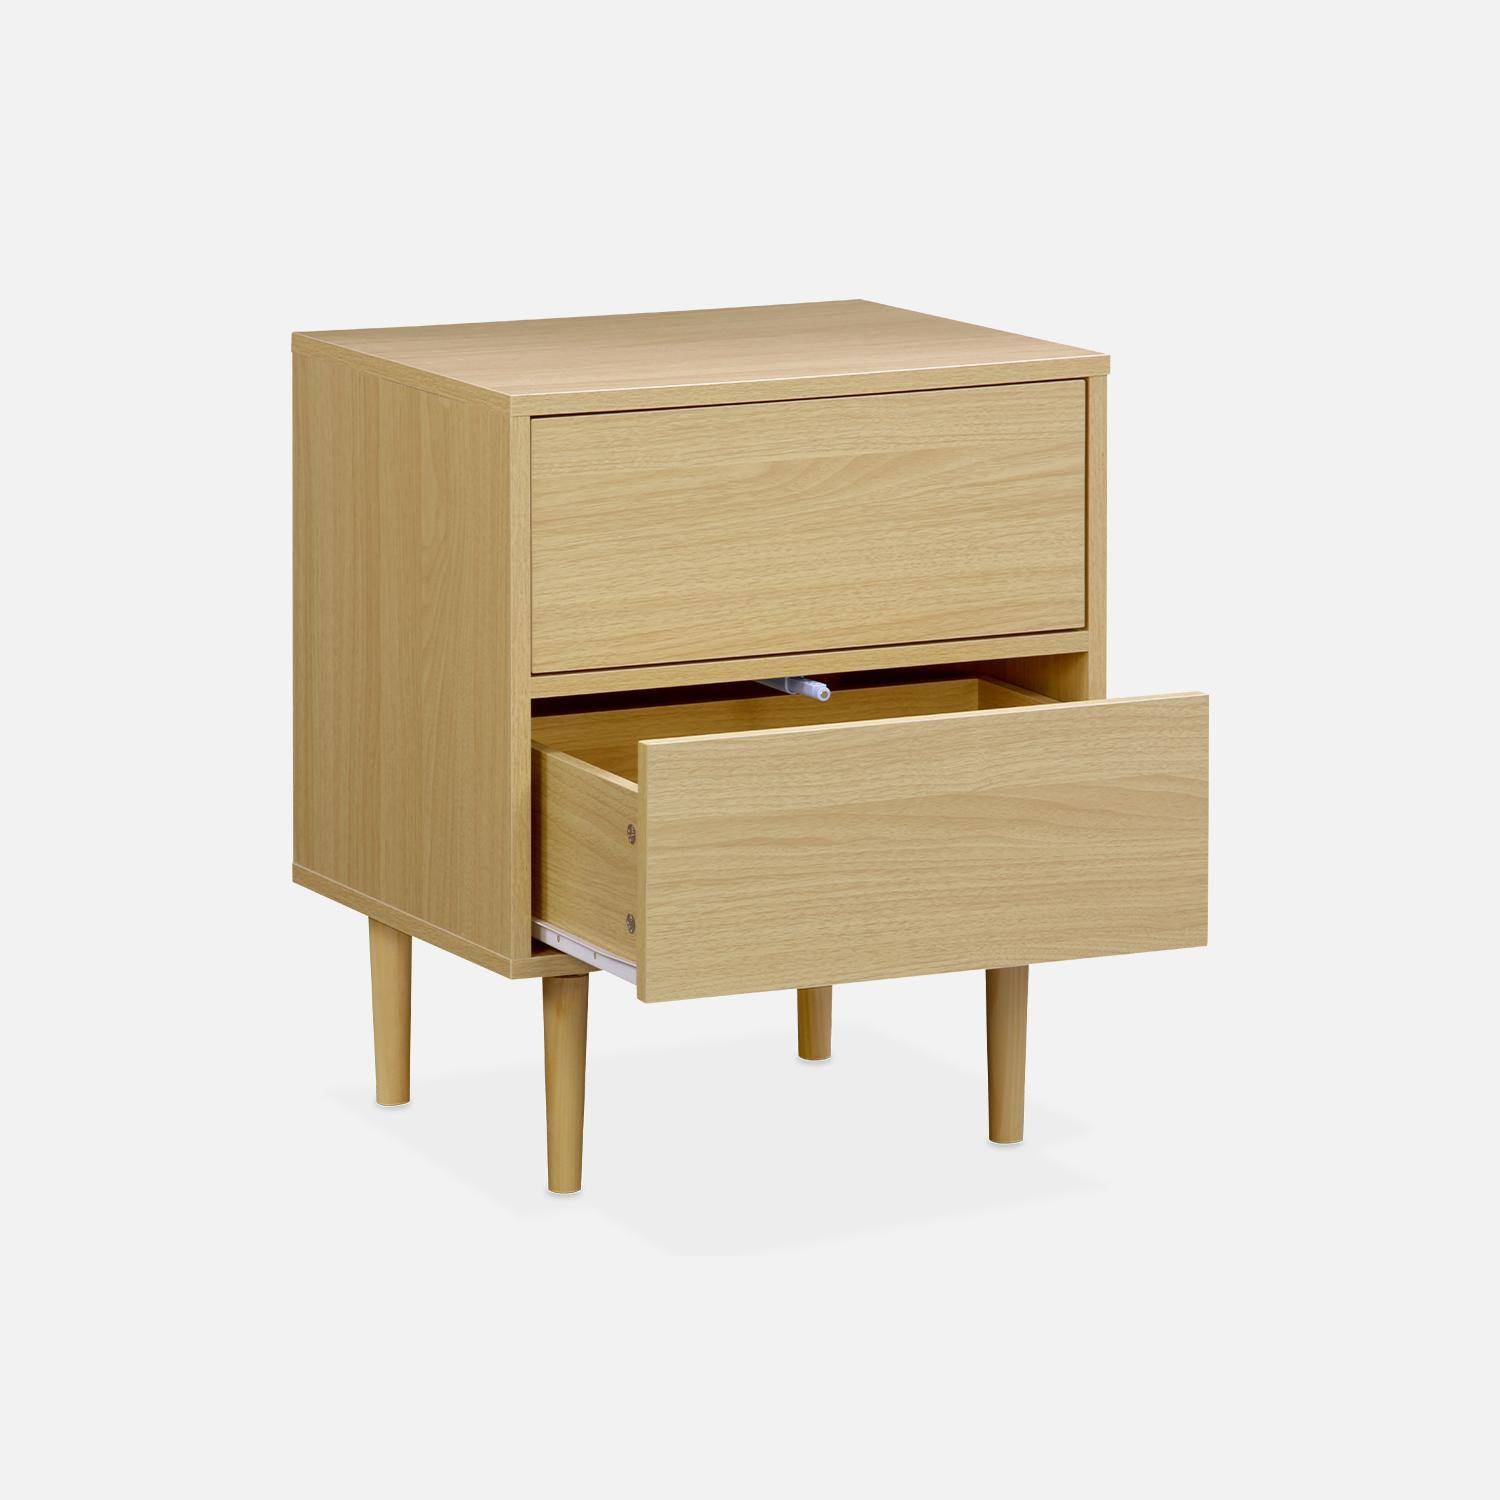 Pair of wood-effect bedside tables with two drawers, 48x40x59cm - Mika - Natural Wood,sweeek,Photo6